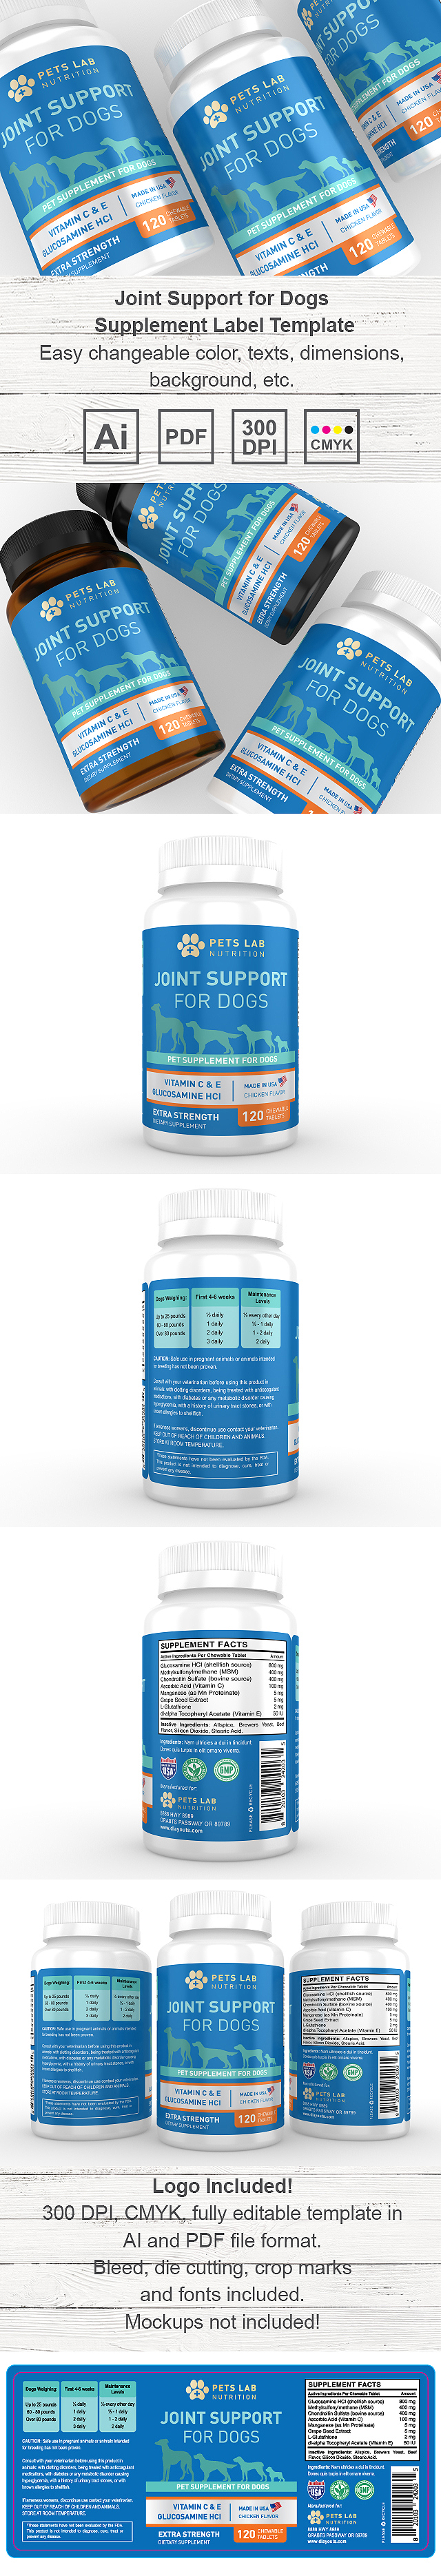 Pet Hip and Joint Supplement Label Template